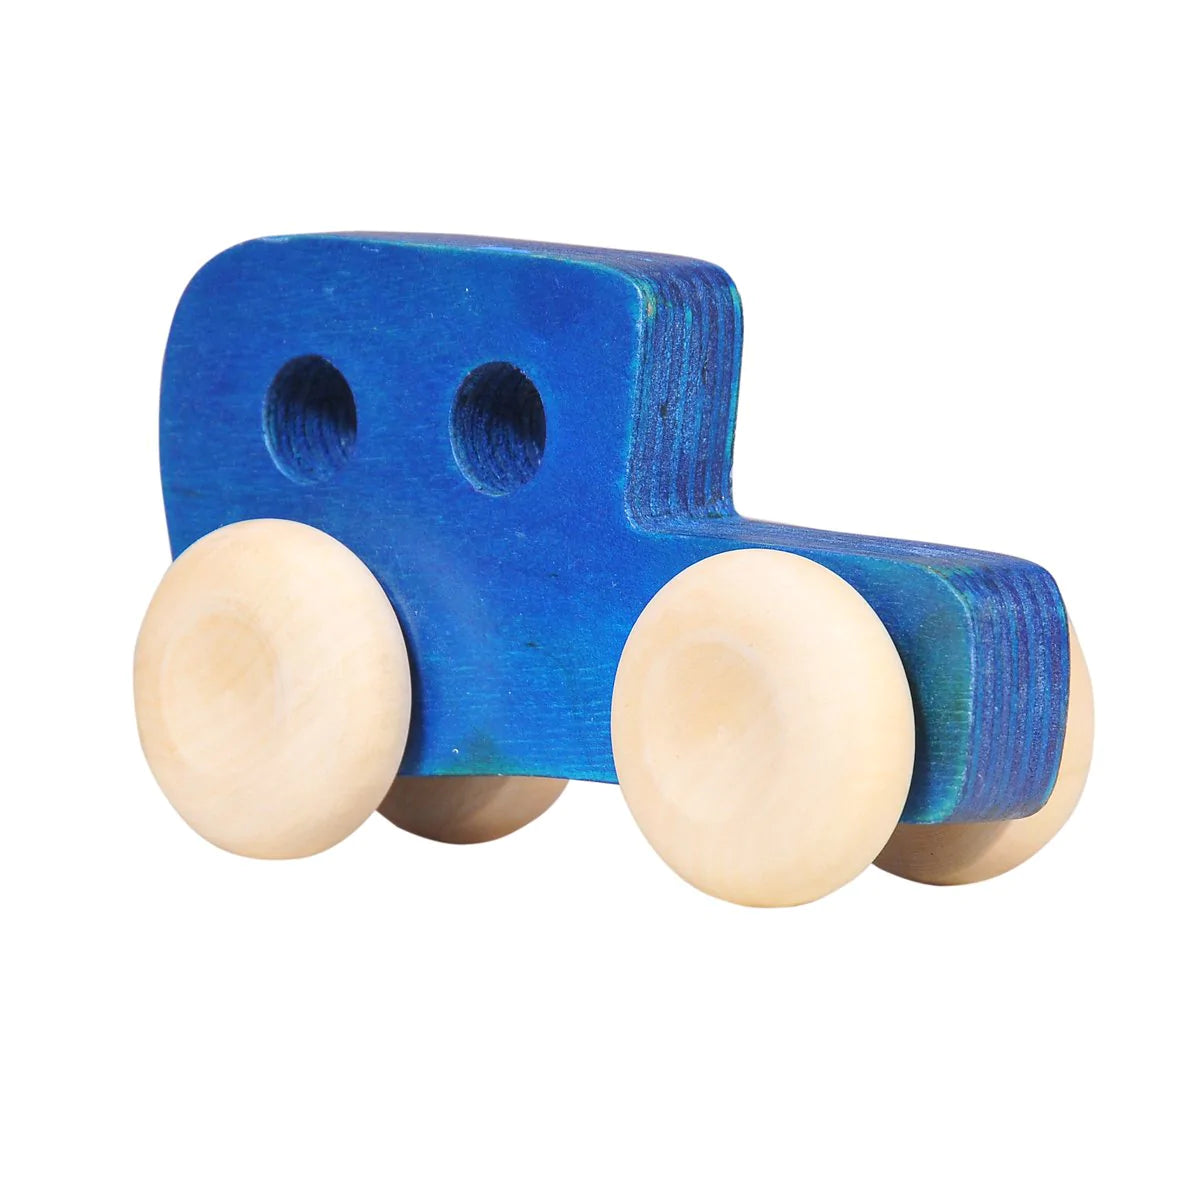 Buy Jeep Wooden Toy - SkilloToys.com